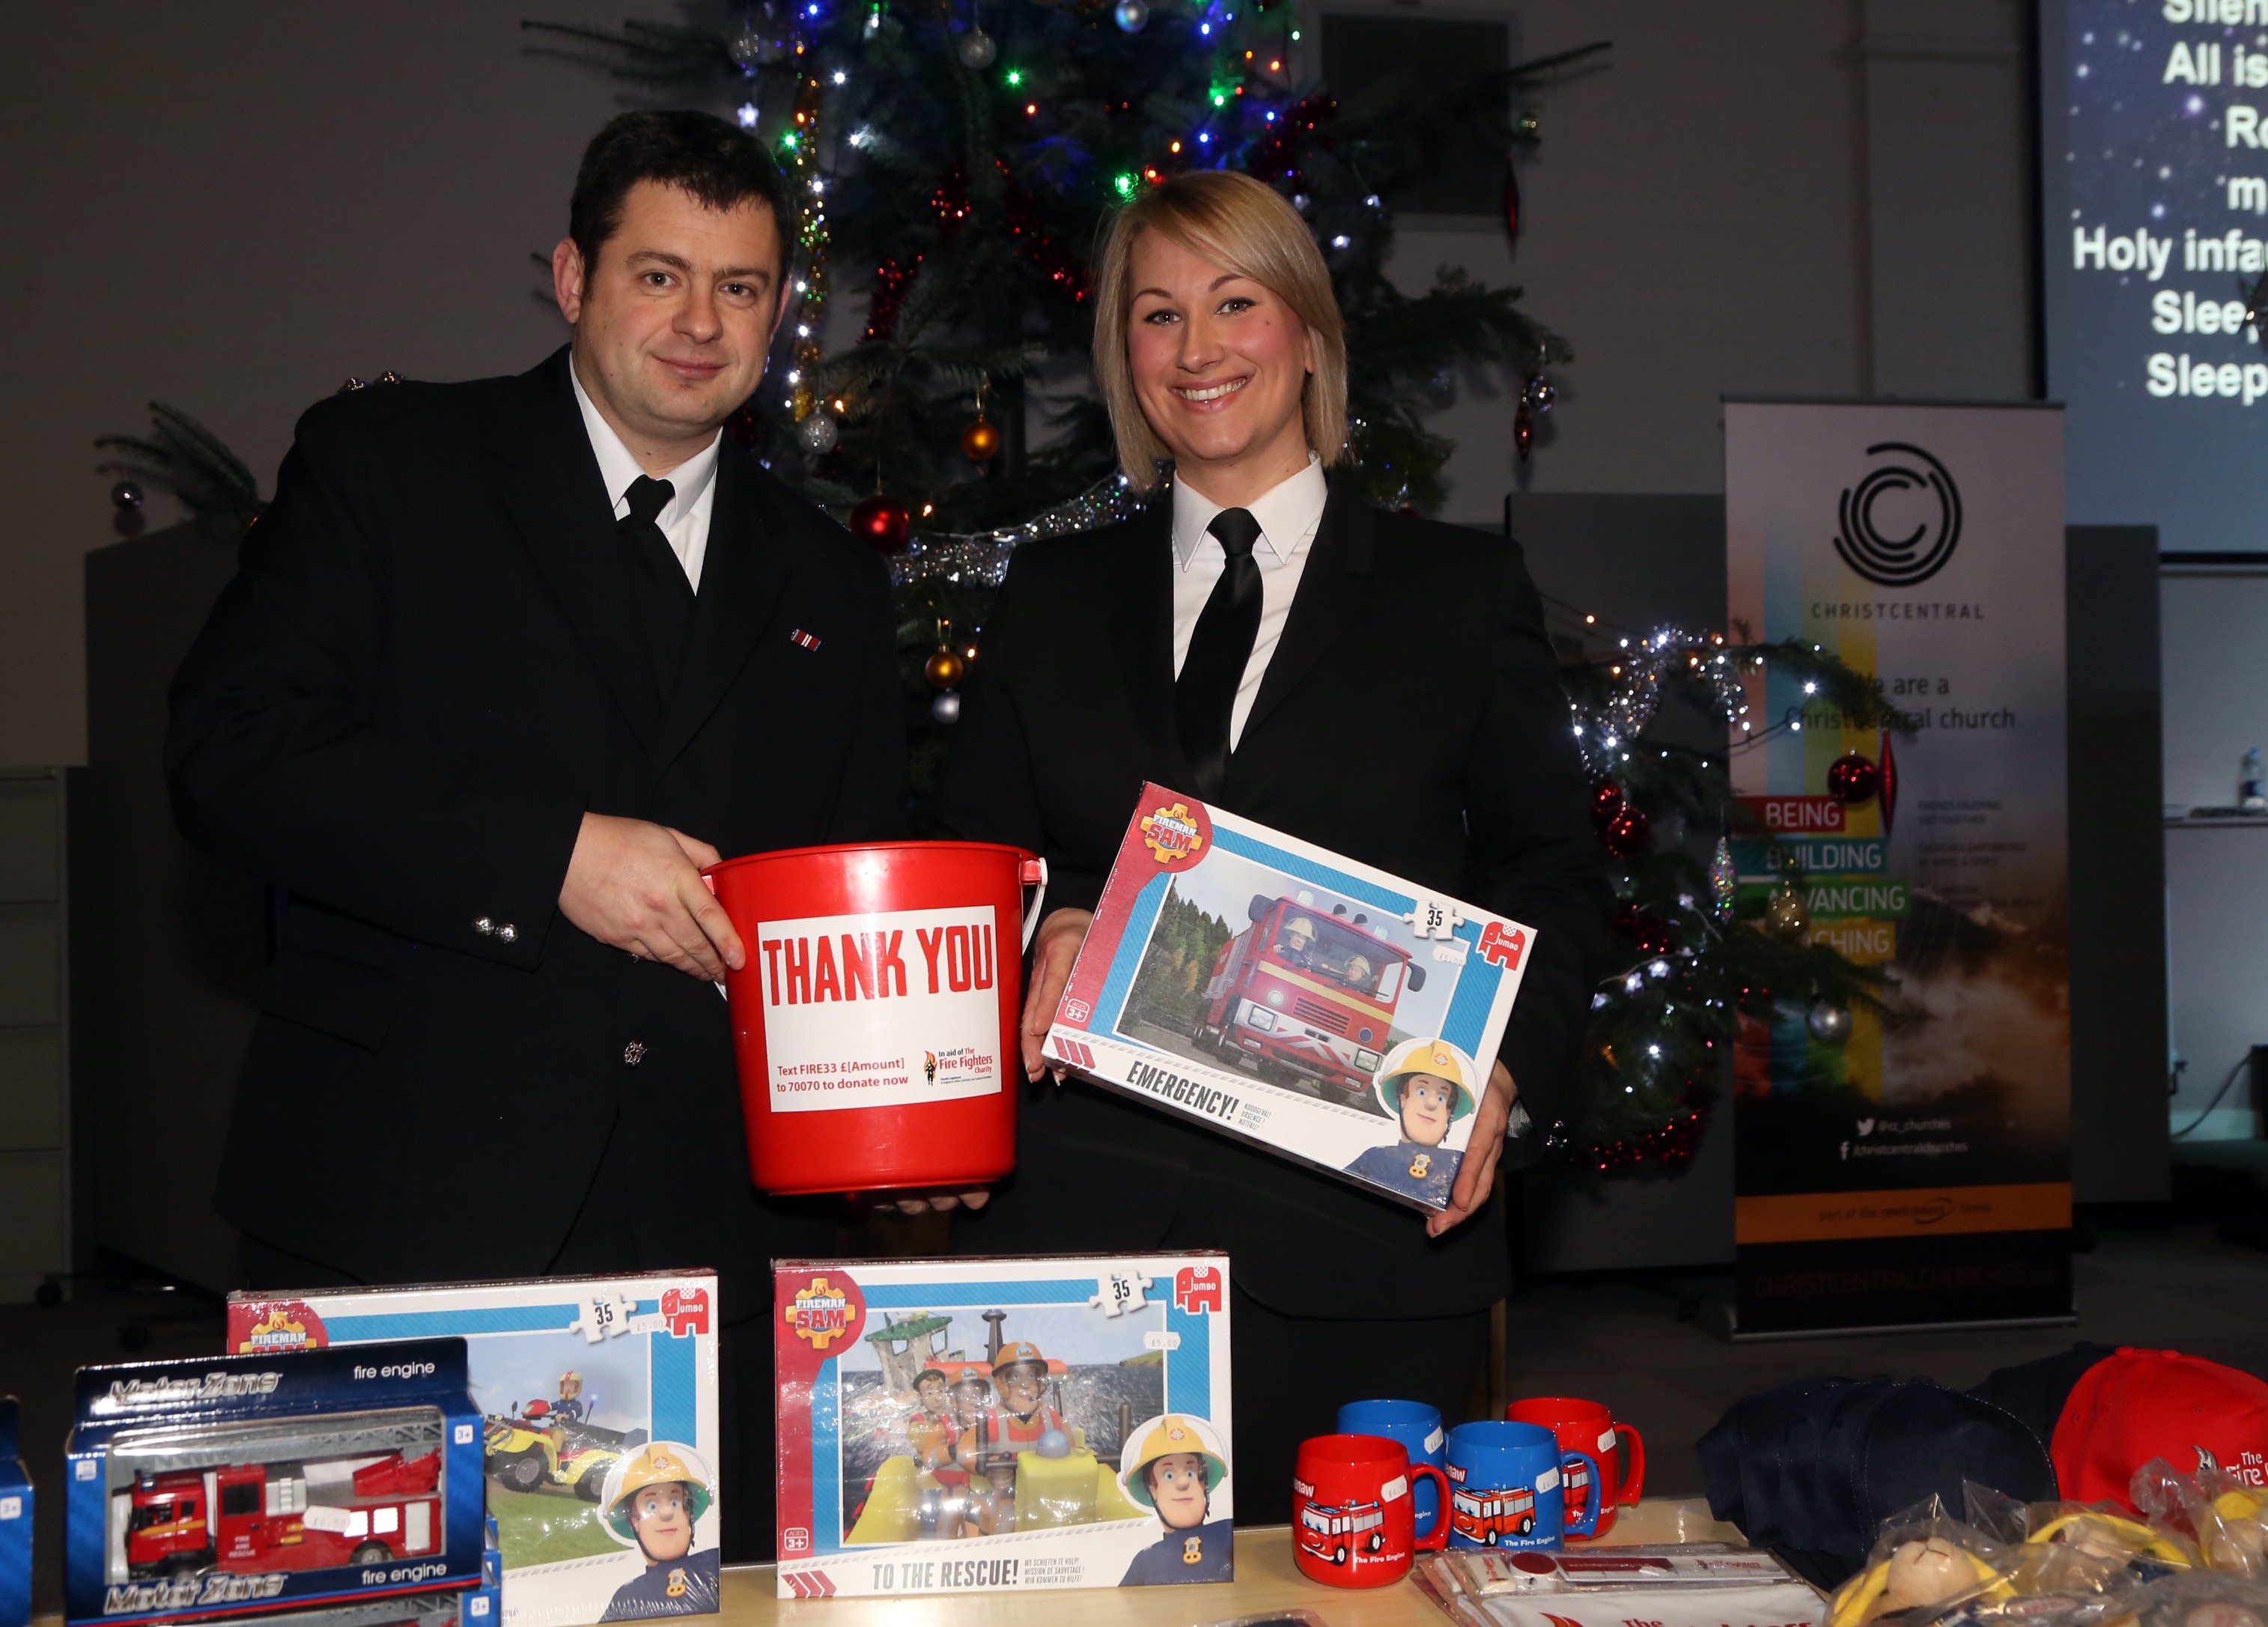 Funds were raised for the Firefighters Charity